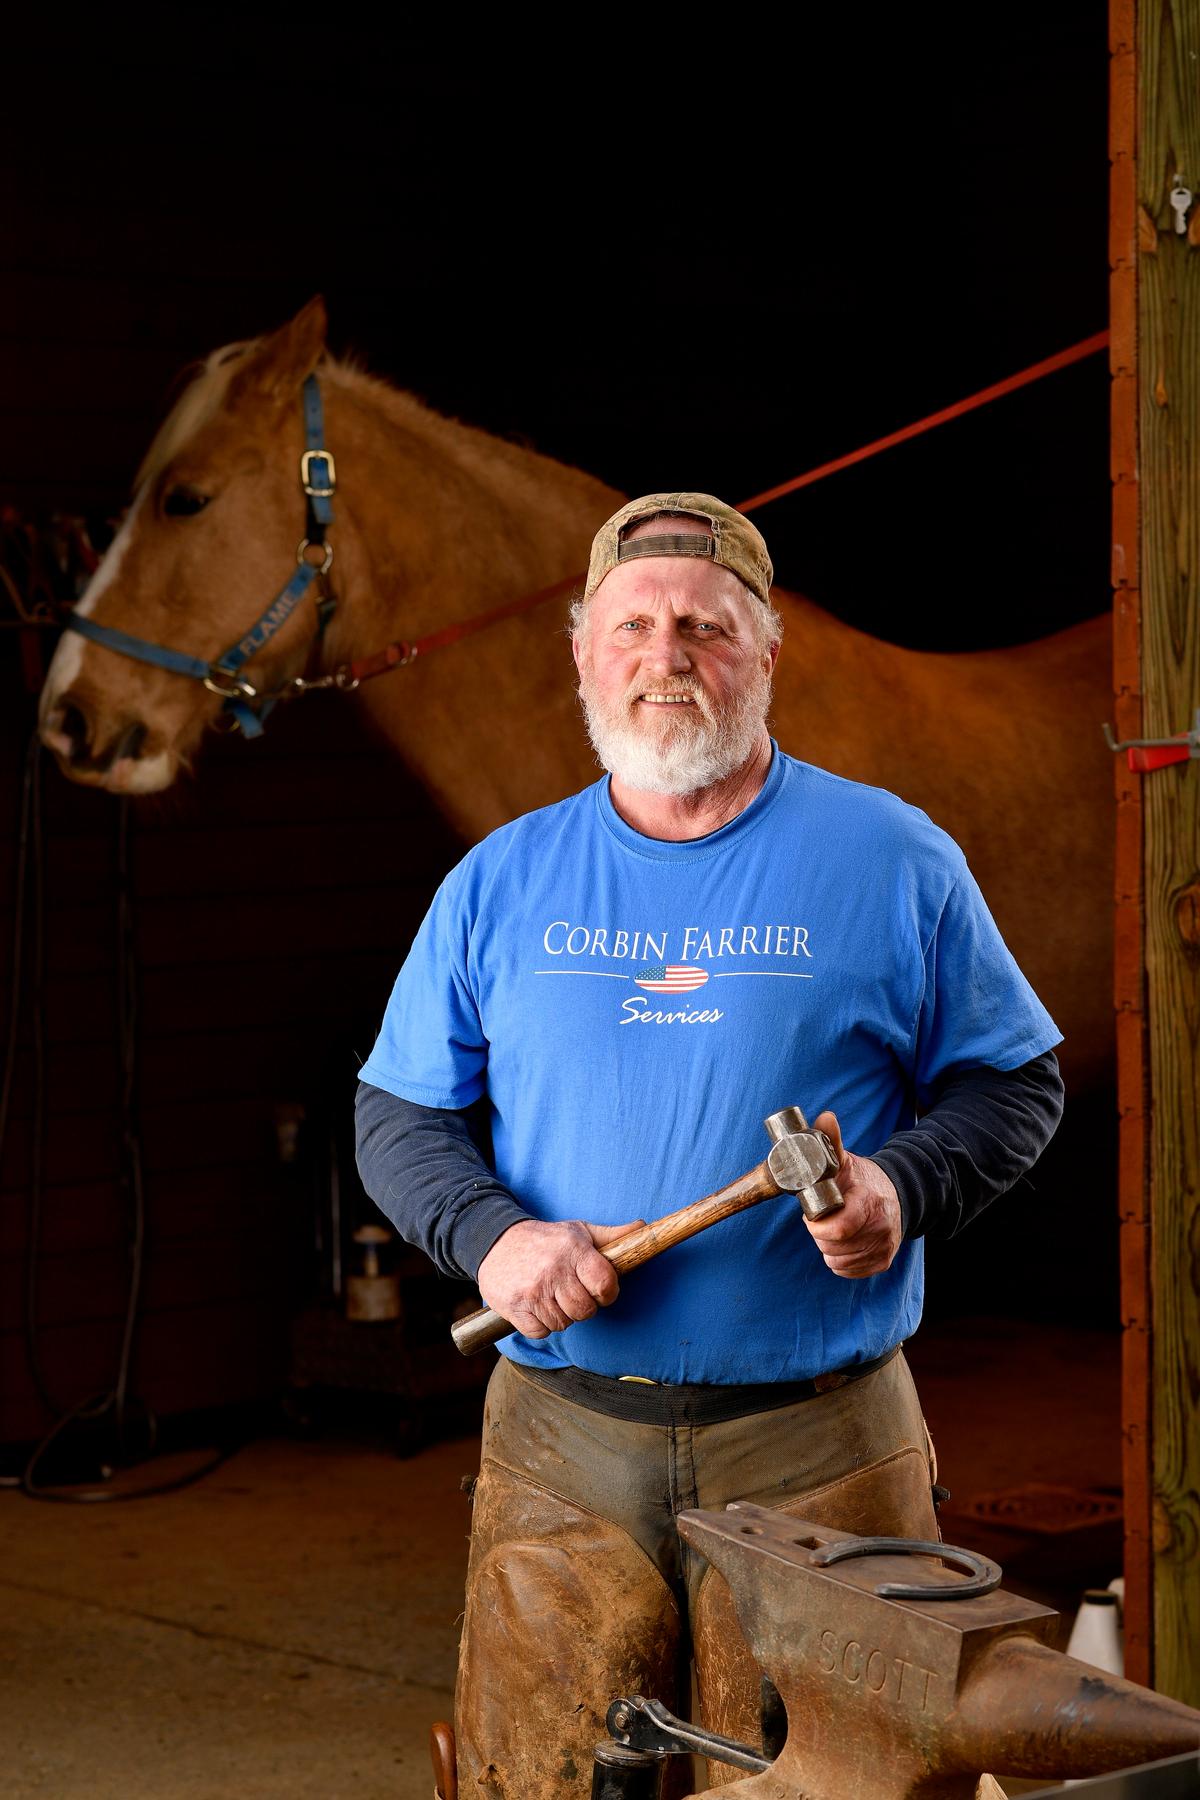 Terry Corbin of Corbin Farrier Services poses for a portrait while changing the horseshoes on Gambler's Golden Flame, a horse owned by Susan Smith, in Rixeyville, Va. (Randy Litzinger for The Epoch Times)